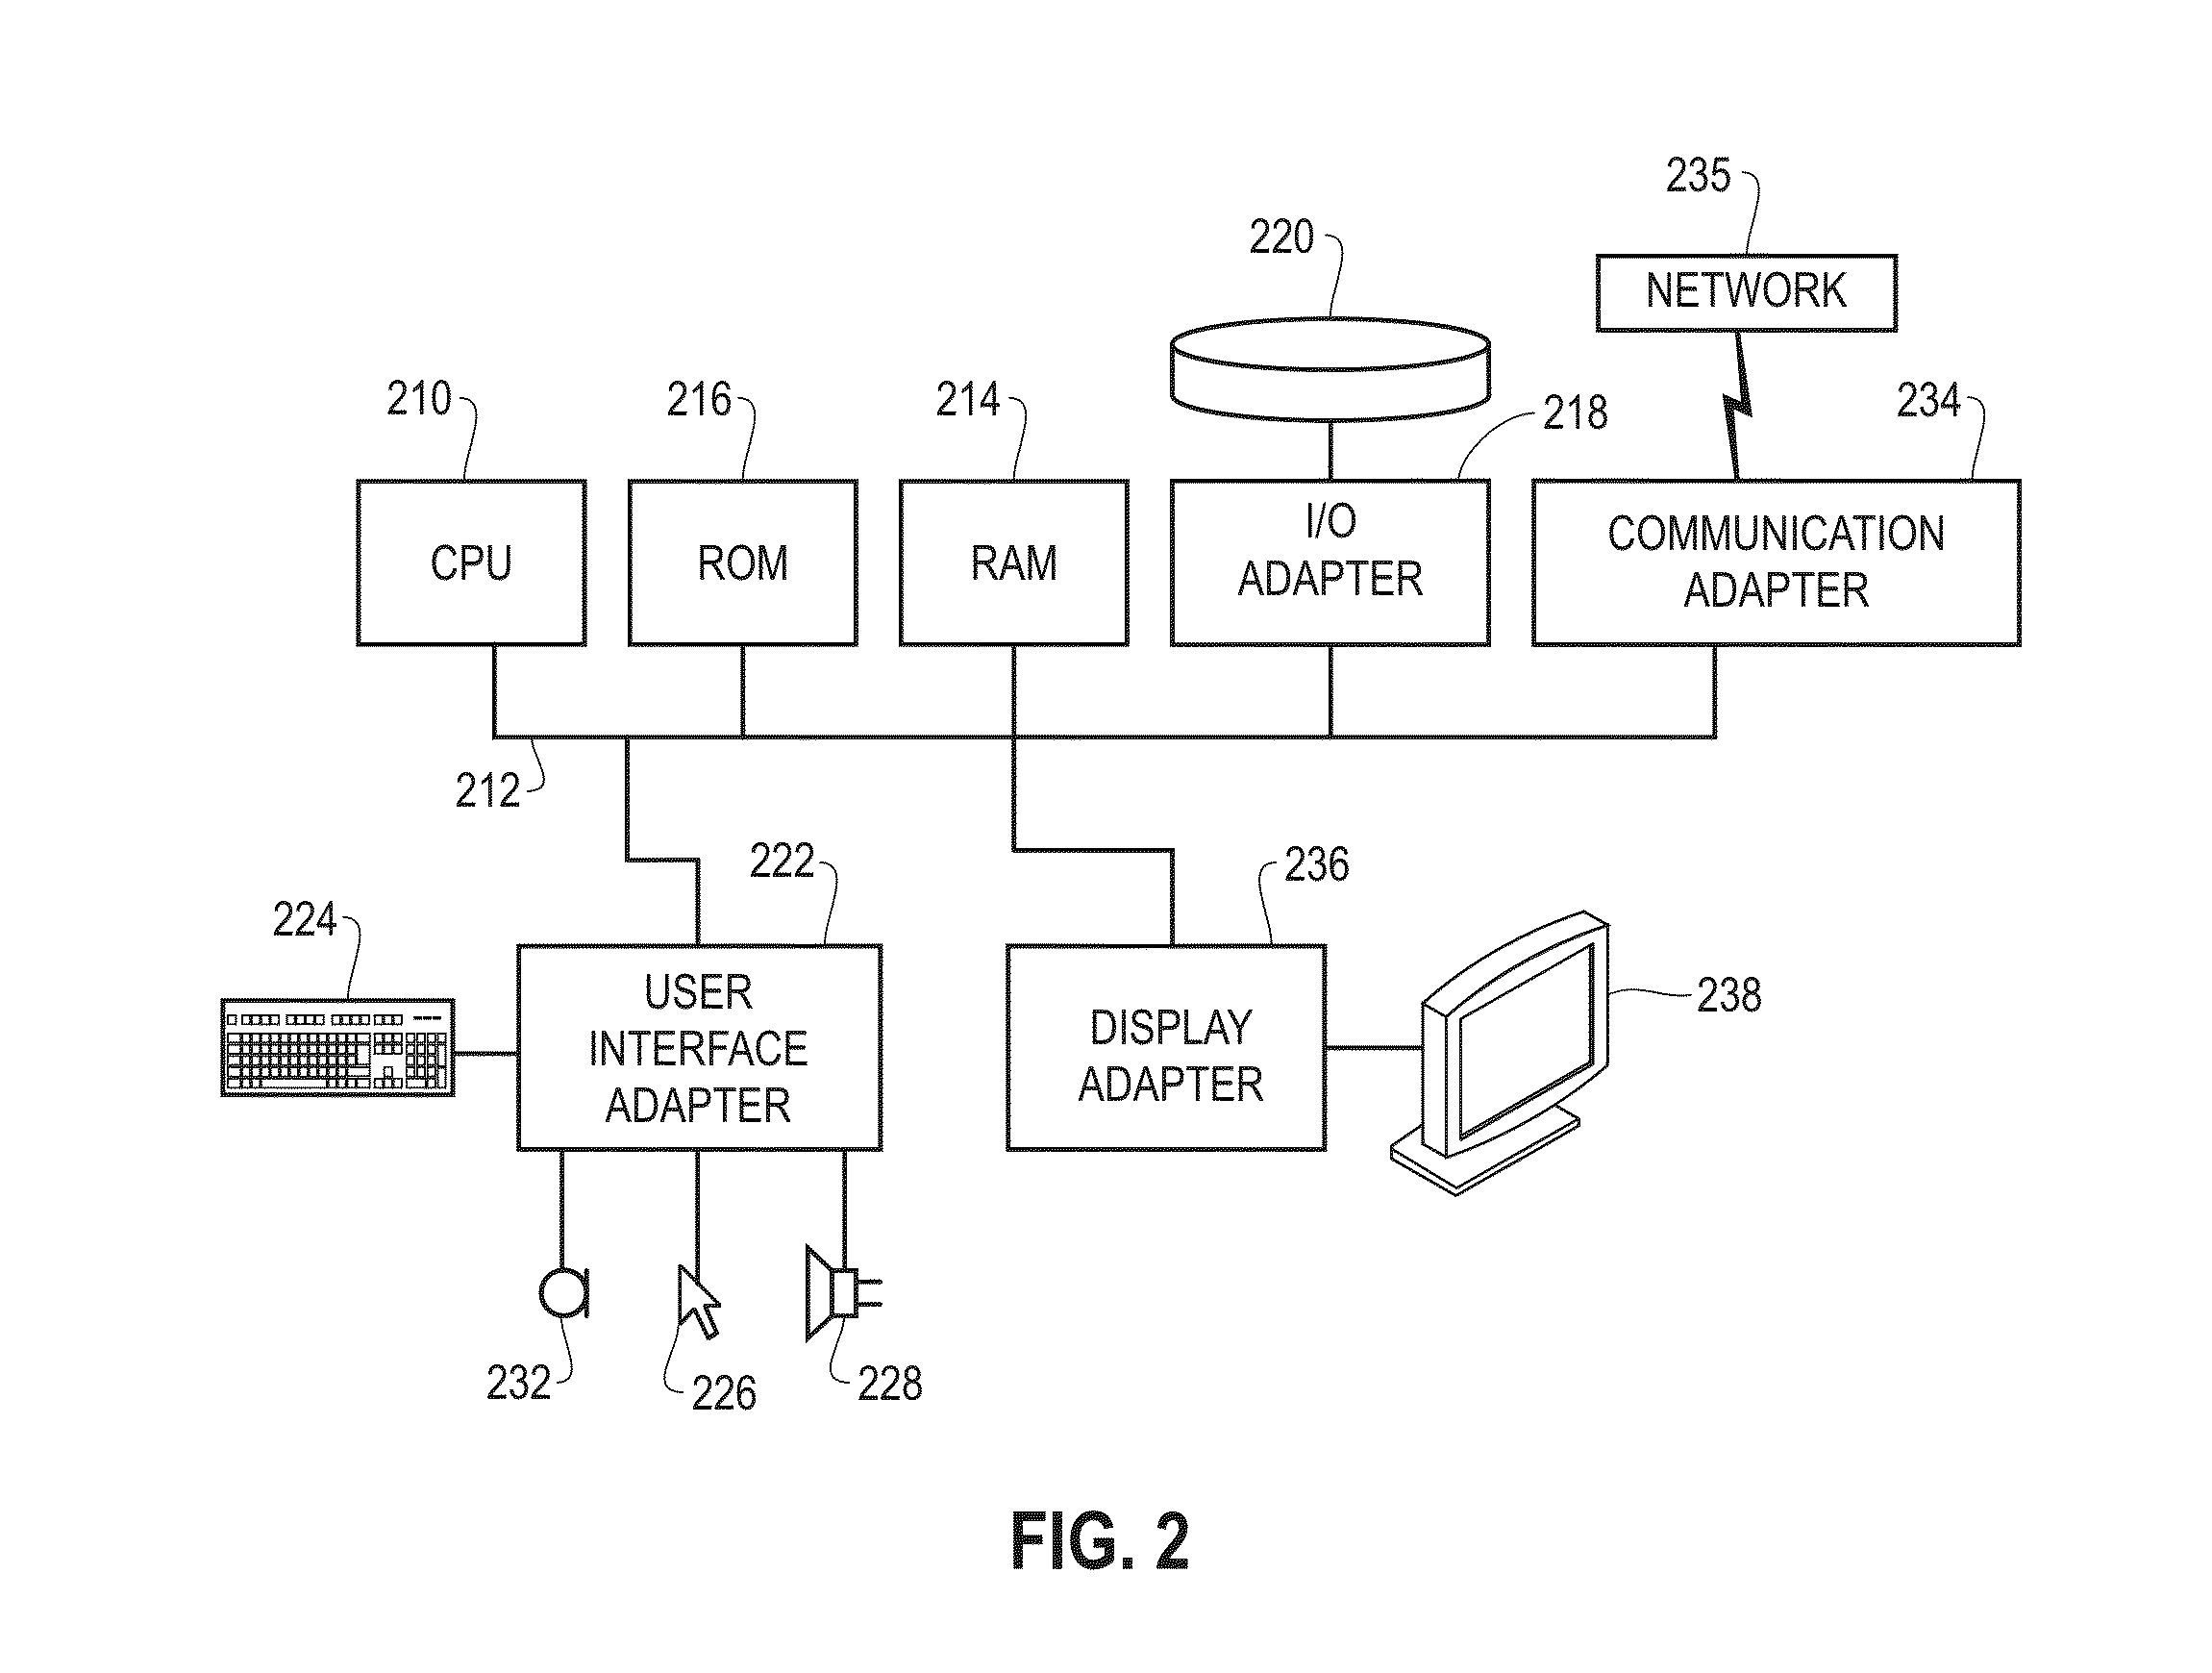 Hardware for a bitmap data structure for efficient storage of heterogeneous lists